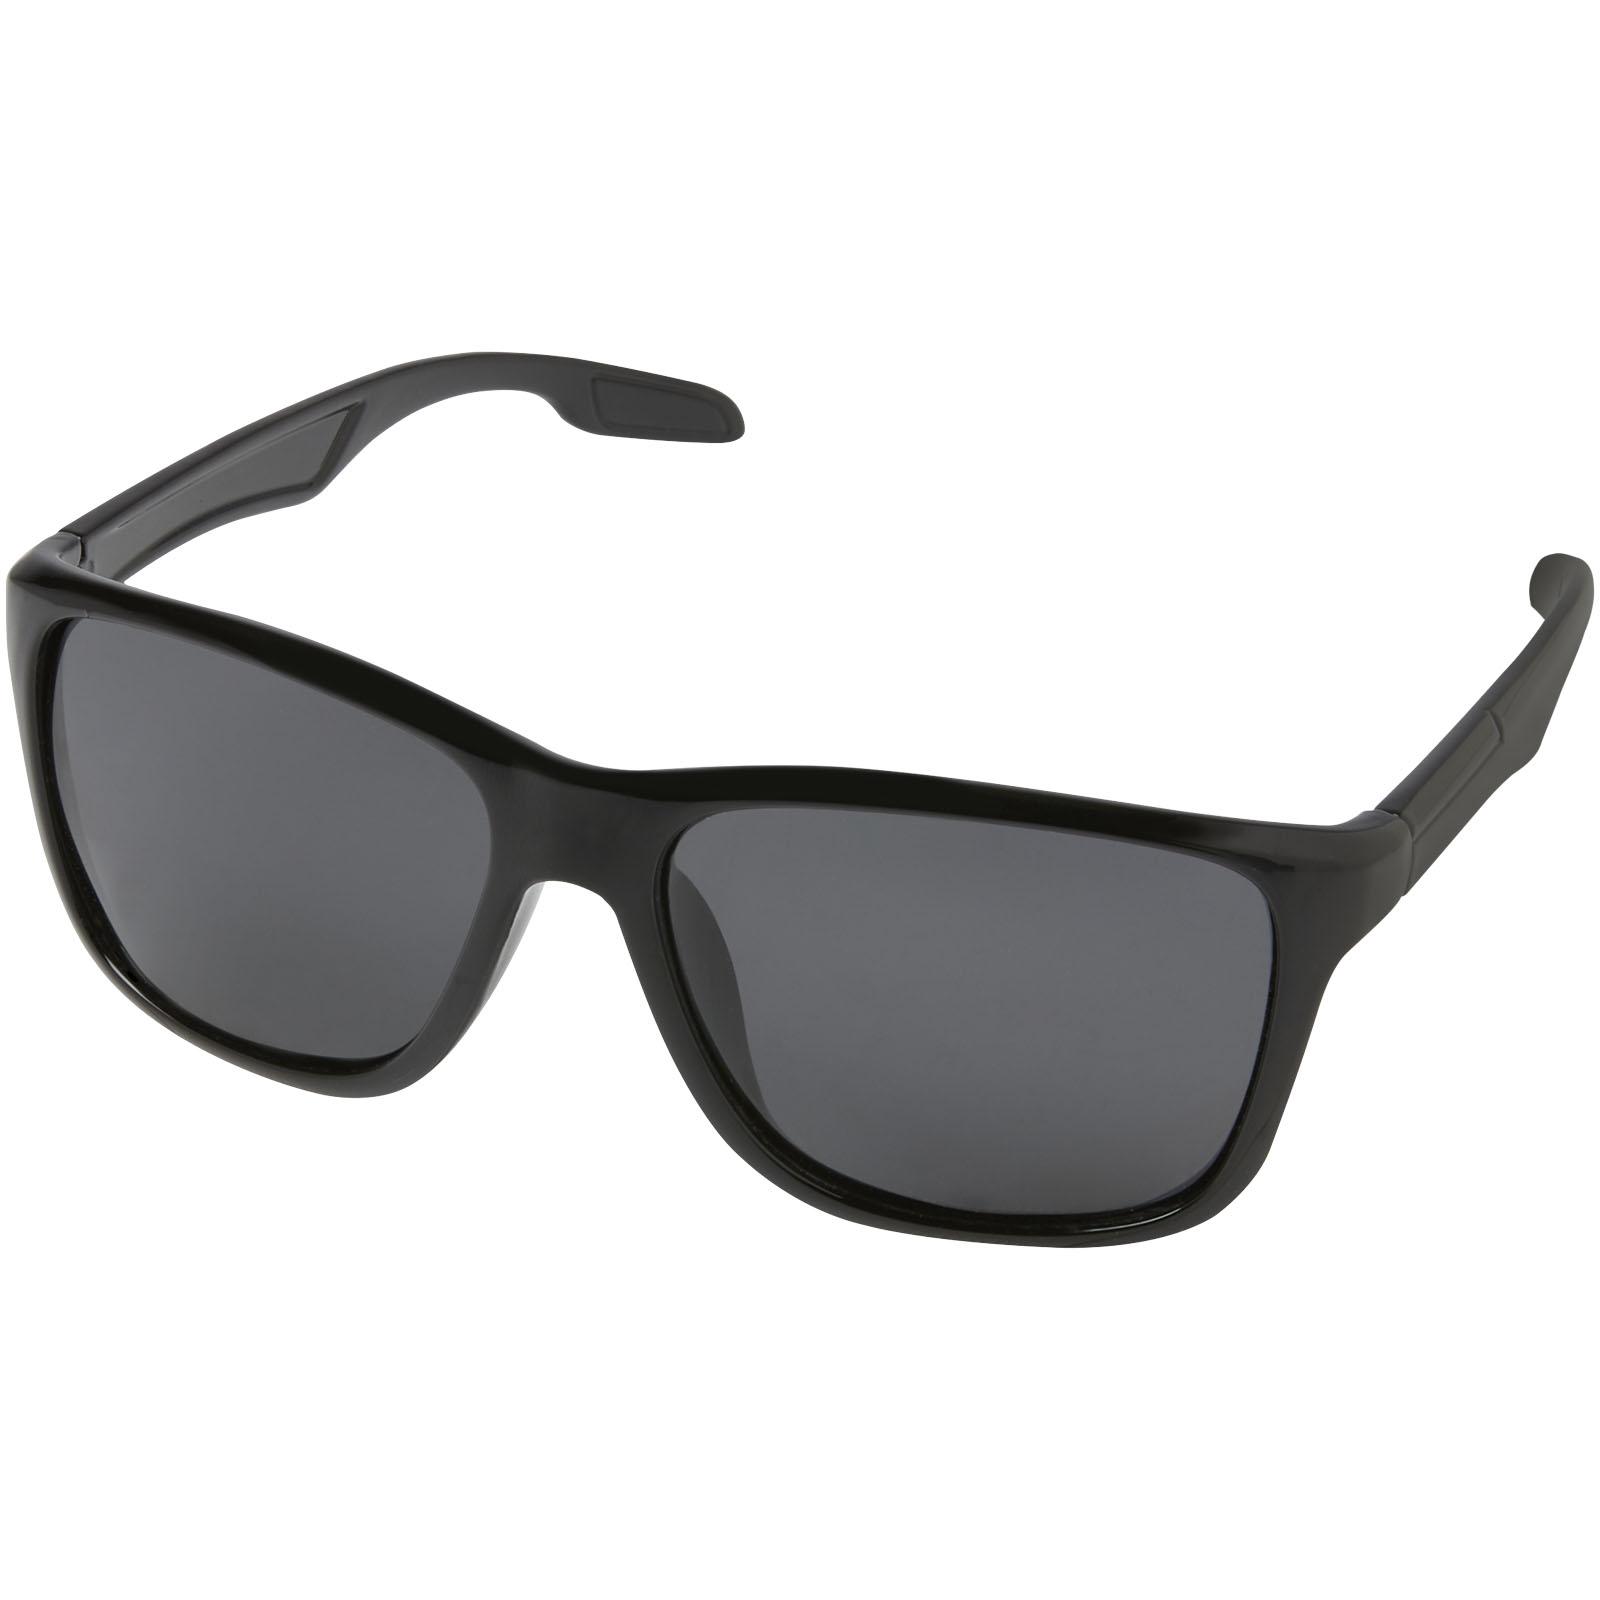 Sports & Leisure - Eiger polarized sunglasses in recycled PET casing